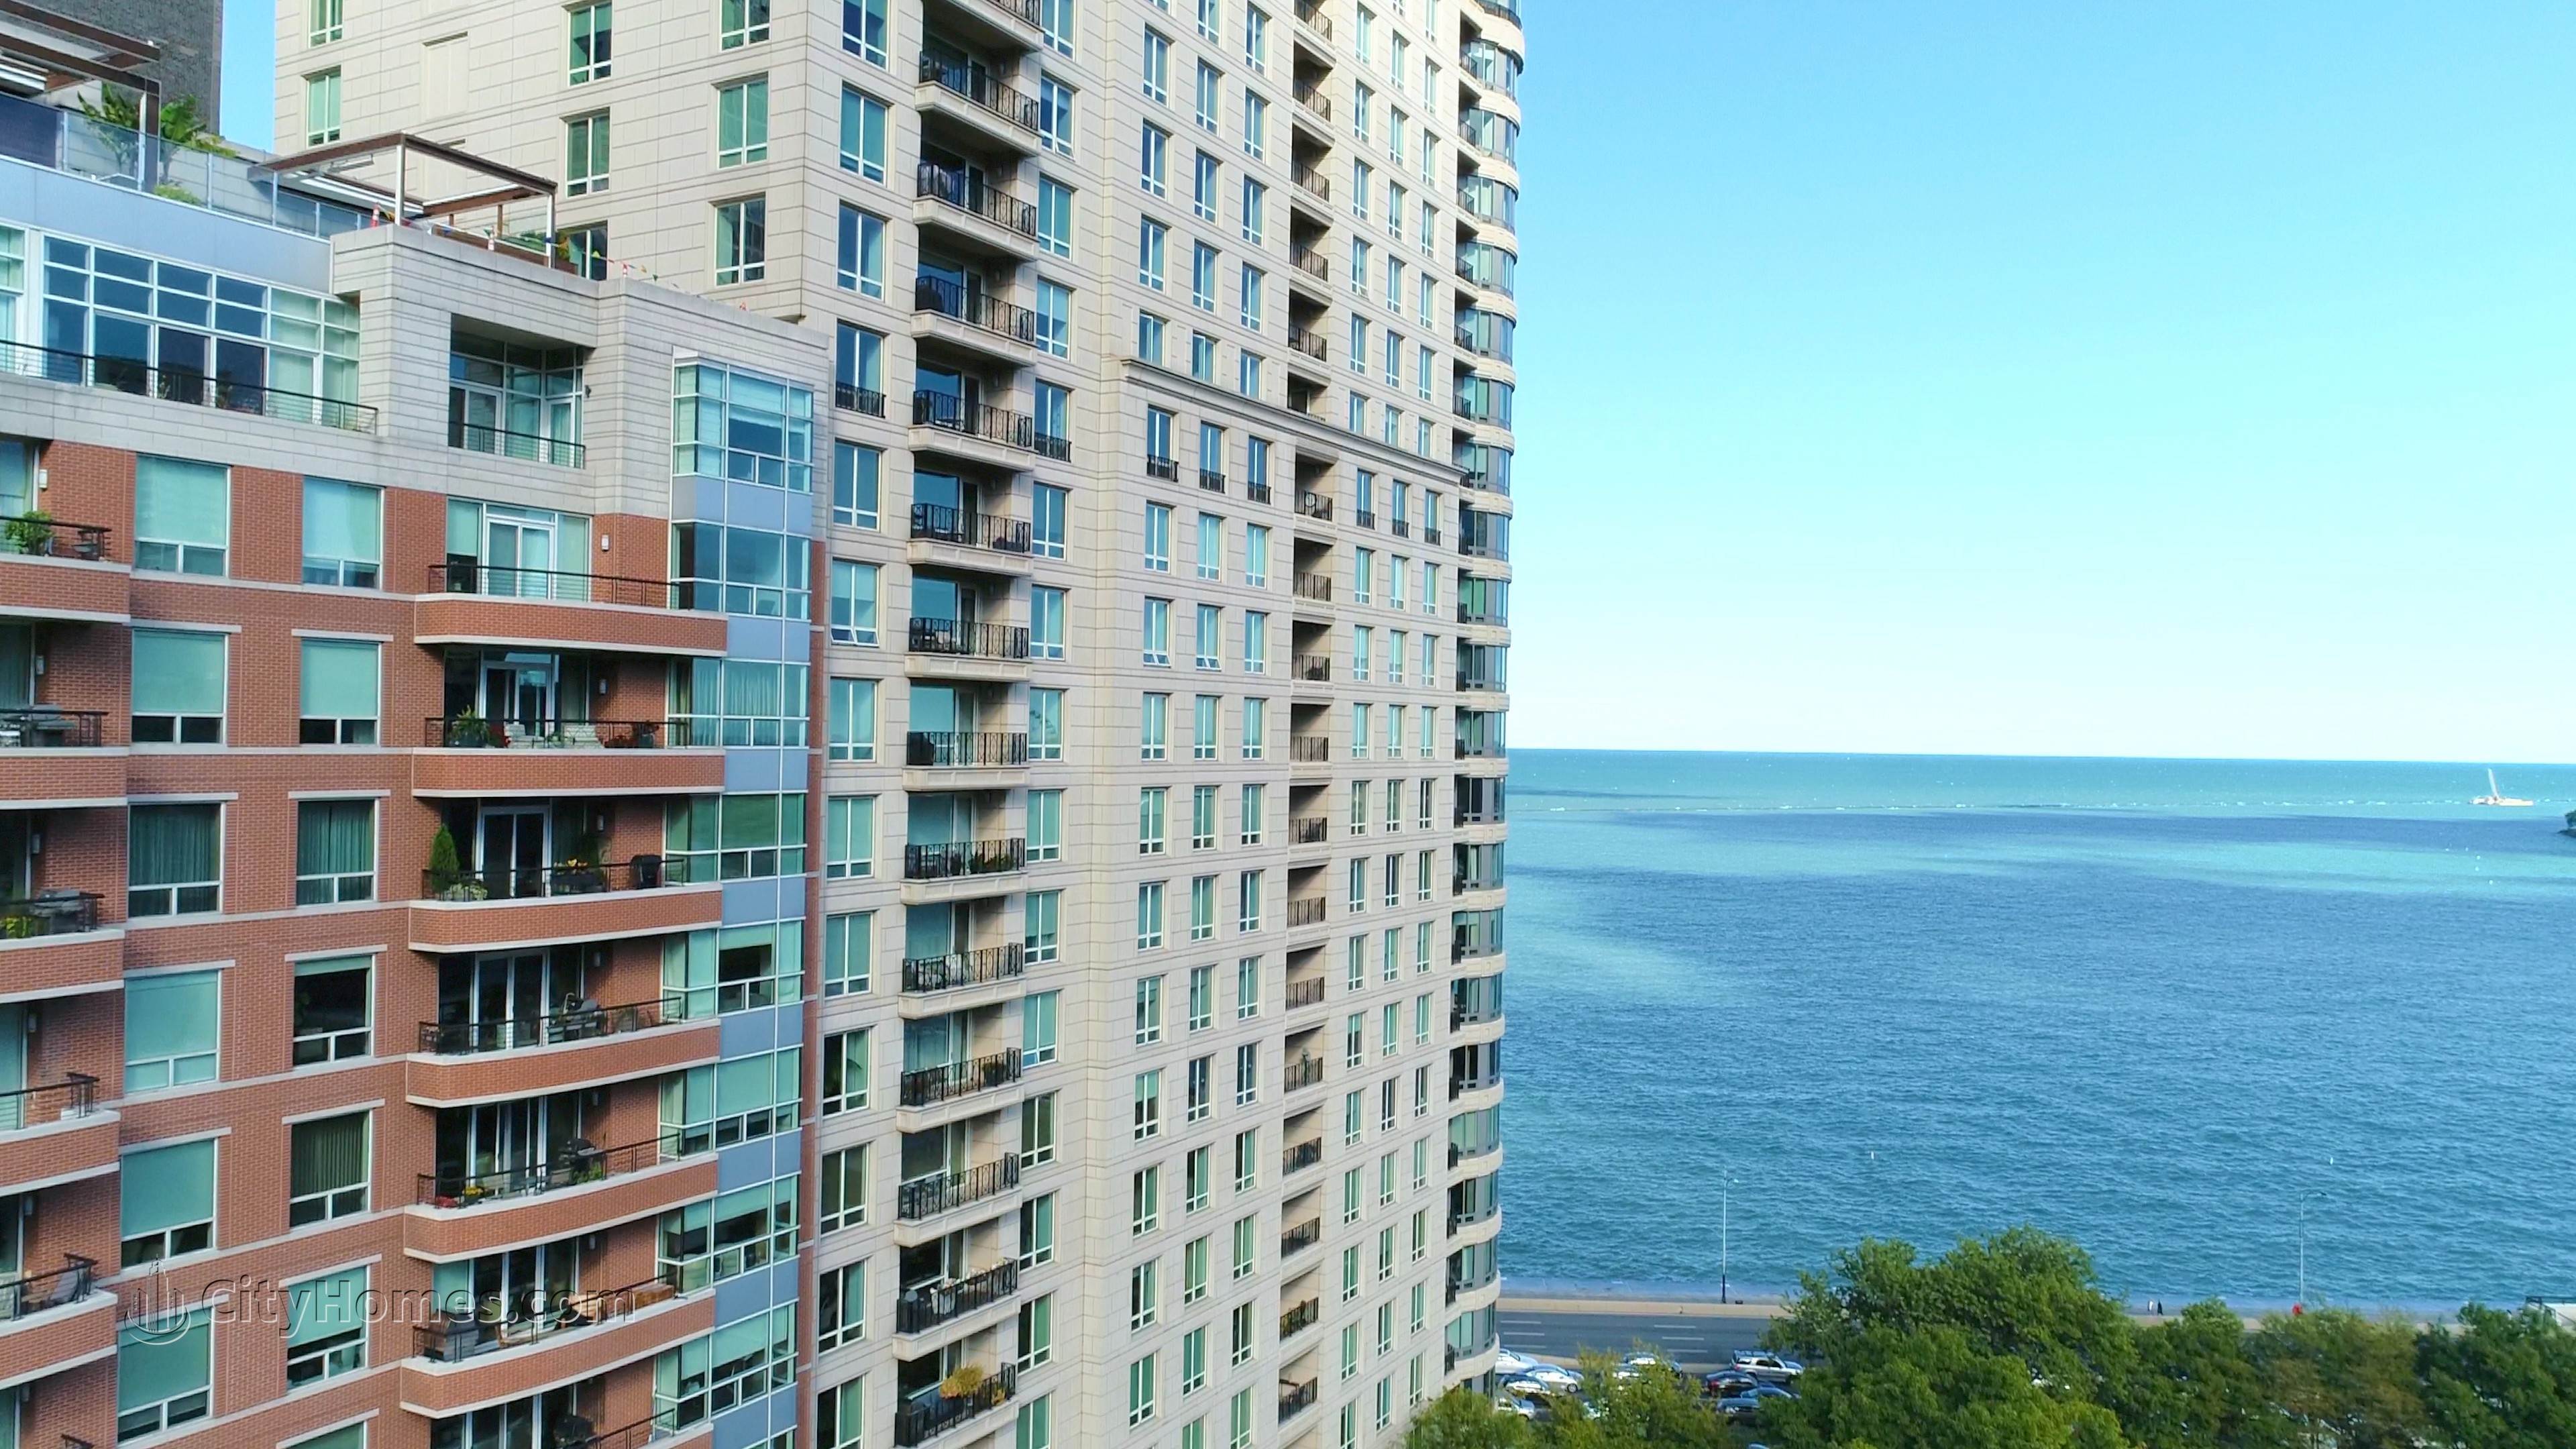 Residences of Lakeshore Park building at 840 N Lake Shore Dr, Central Chicago, Chicago, IL 60611